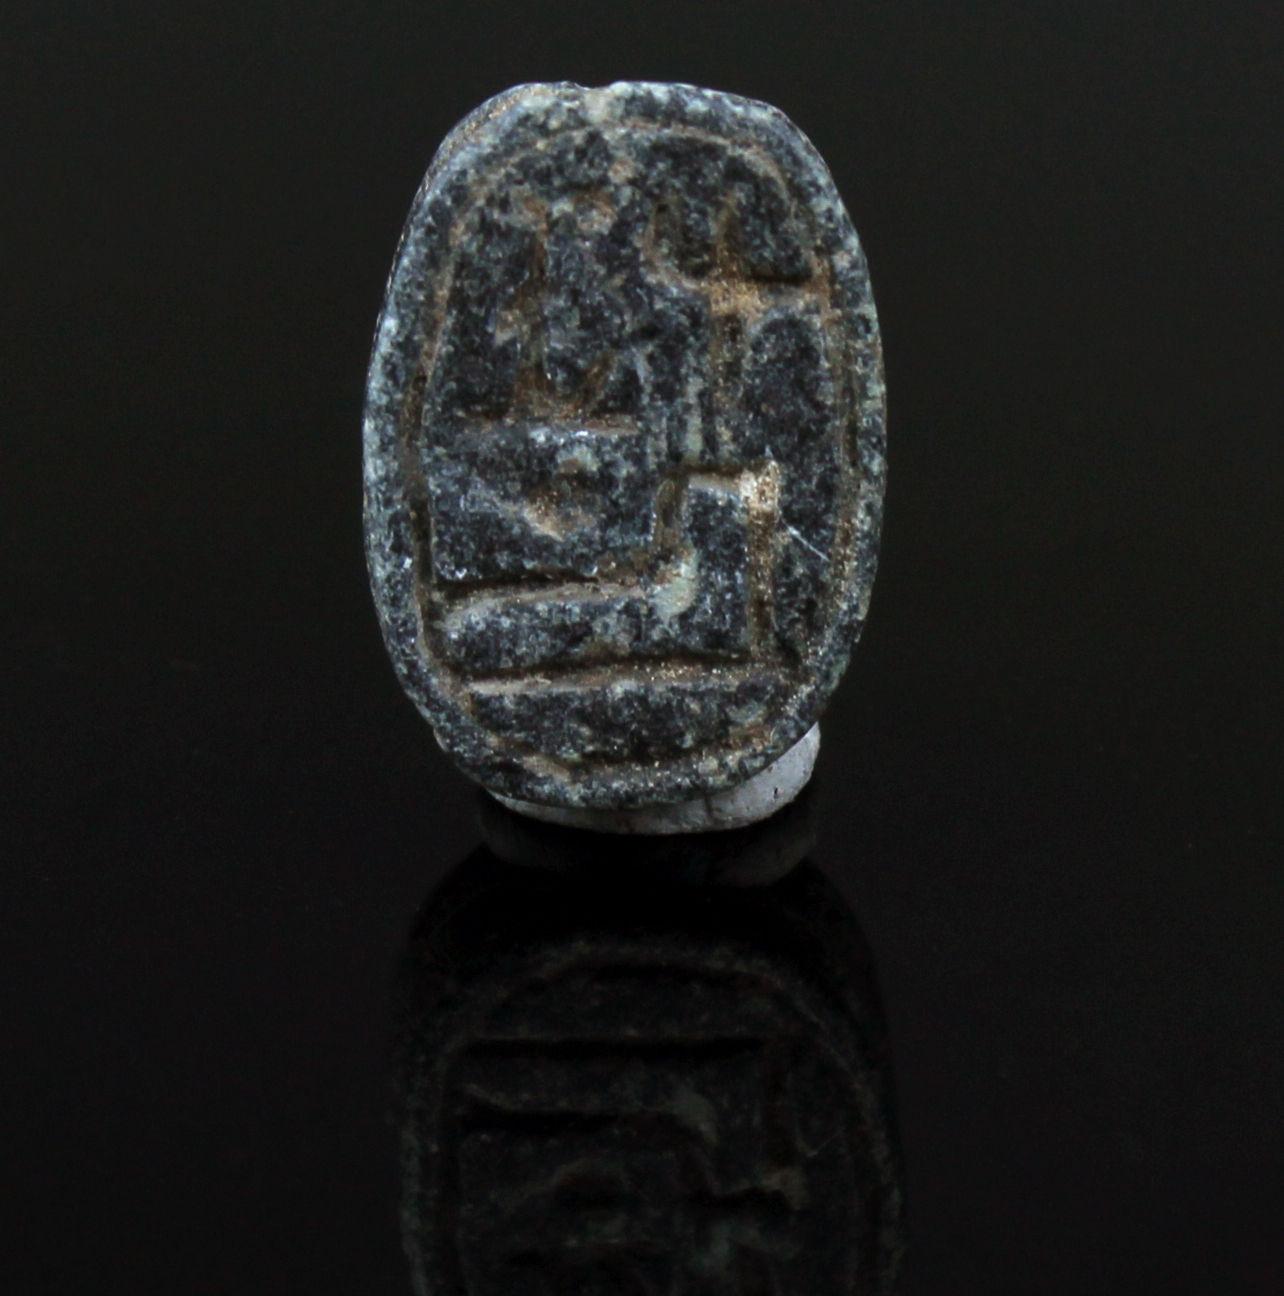 ITEM: Scarab as a commemorative of Ramesses II or prenomen of Shoshenq III
MATERIAL: Black steatite
CULTURE: Egyptian
PERIOD: New Kingdom to Third Intermediate Period, 1279 – 664 B.C
DIMENSIONS: 15 mm x 10 mm
CONDITION: Good condition
PROVENANCE: Ex